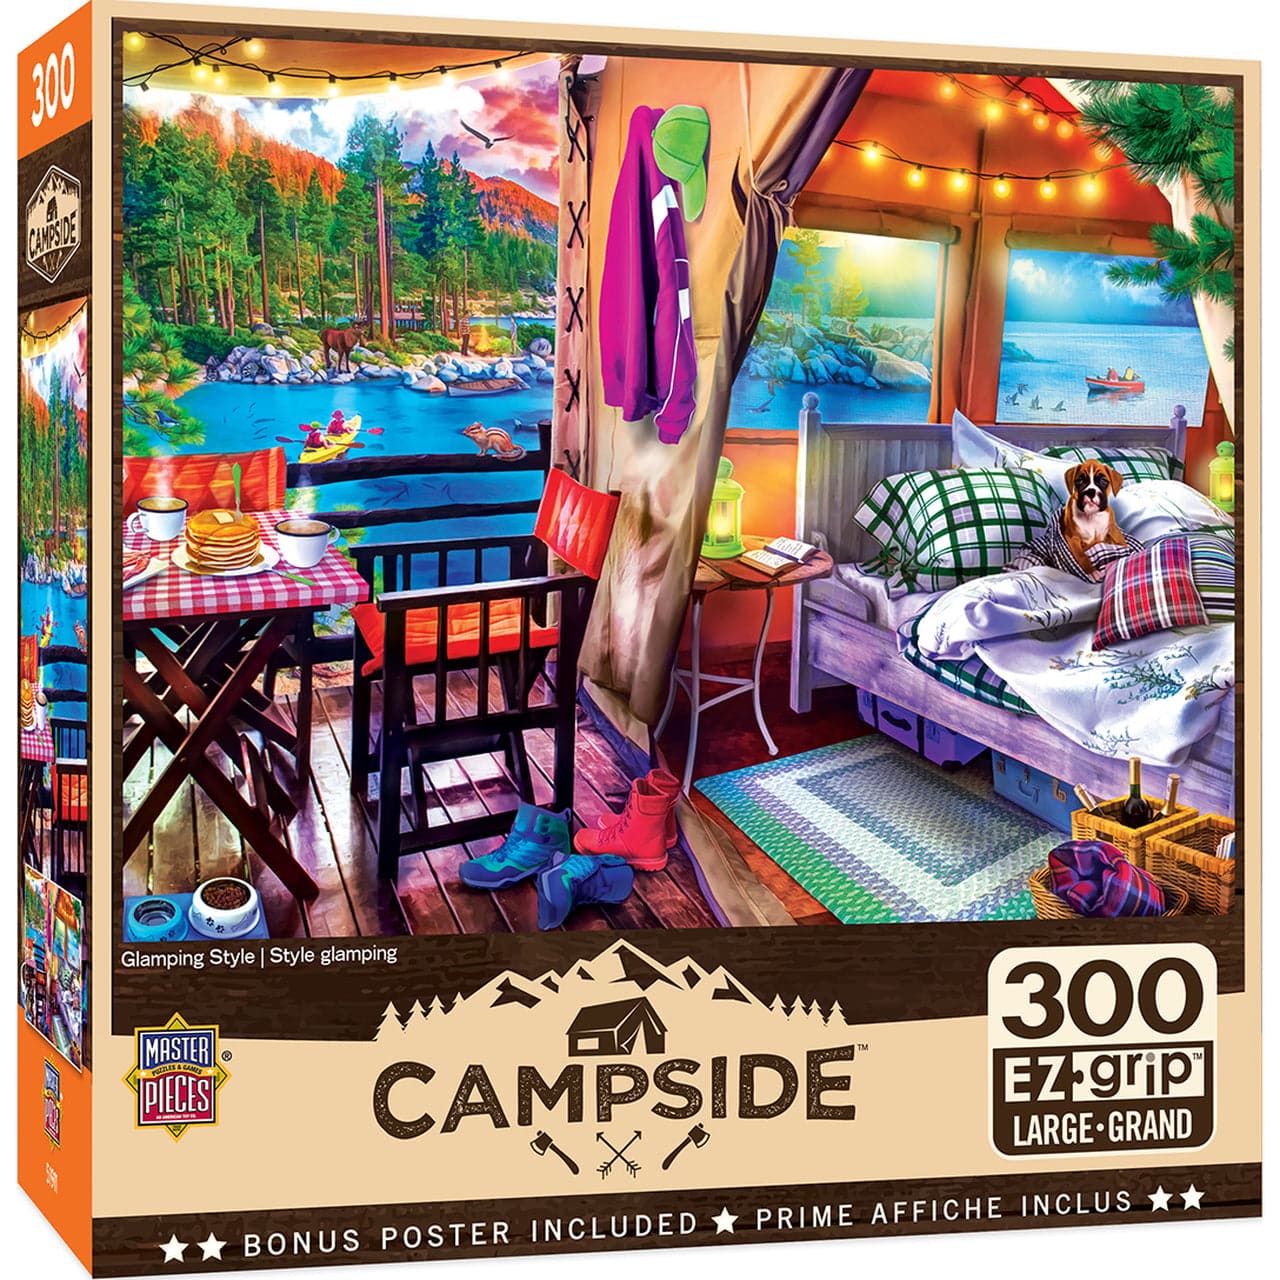 Campside - Glamping Style - 300 Piece EzGrip Puzzle